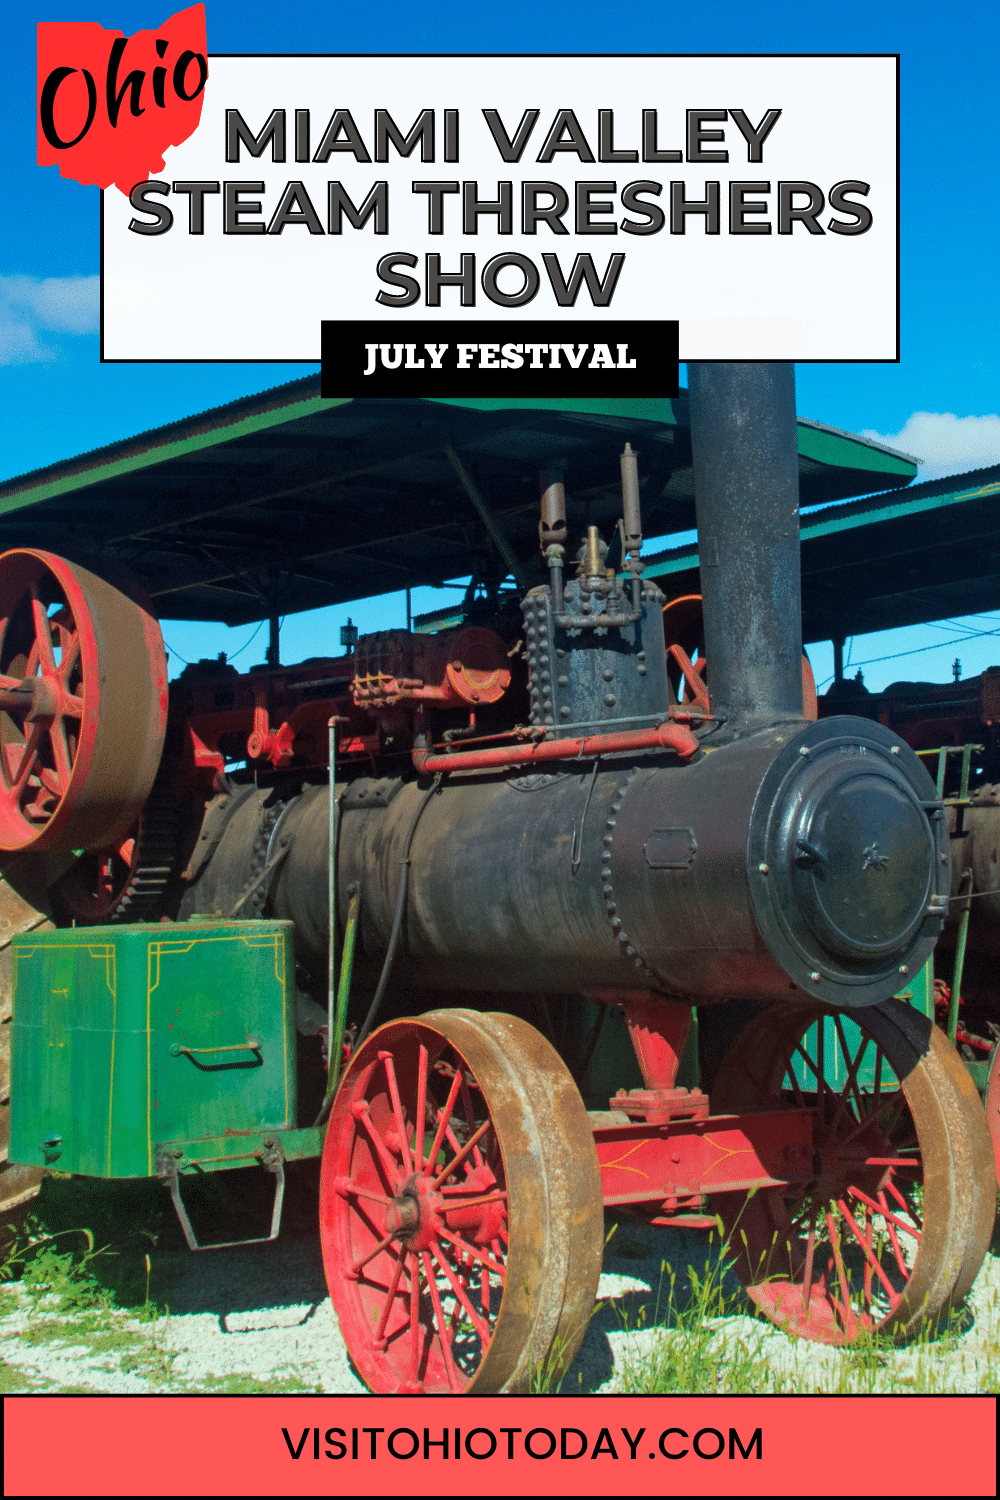 The Miami Valley Steam Threshers Show will occur at Pastime Park in Plain City in mid-July.